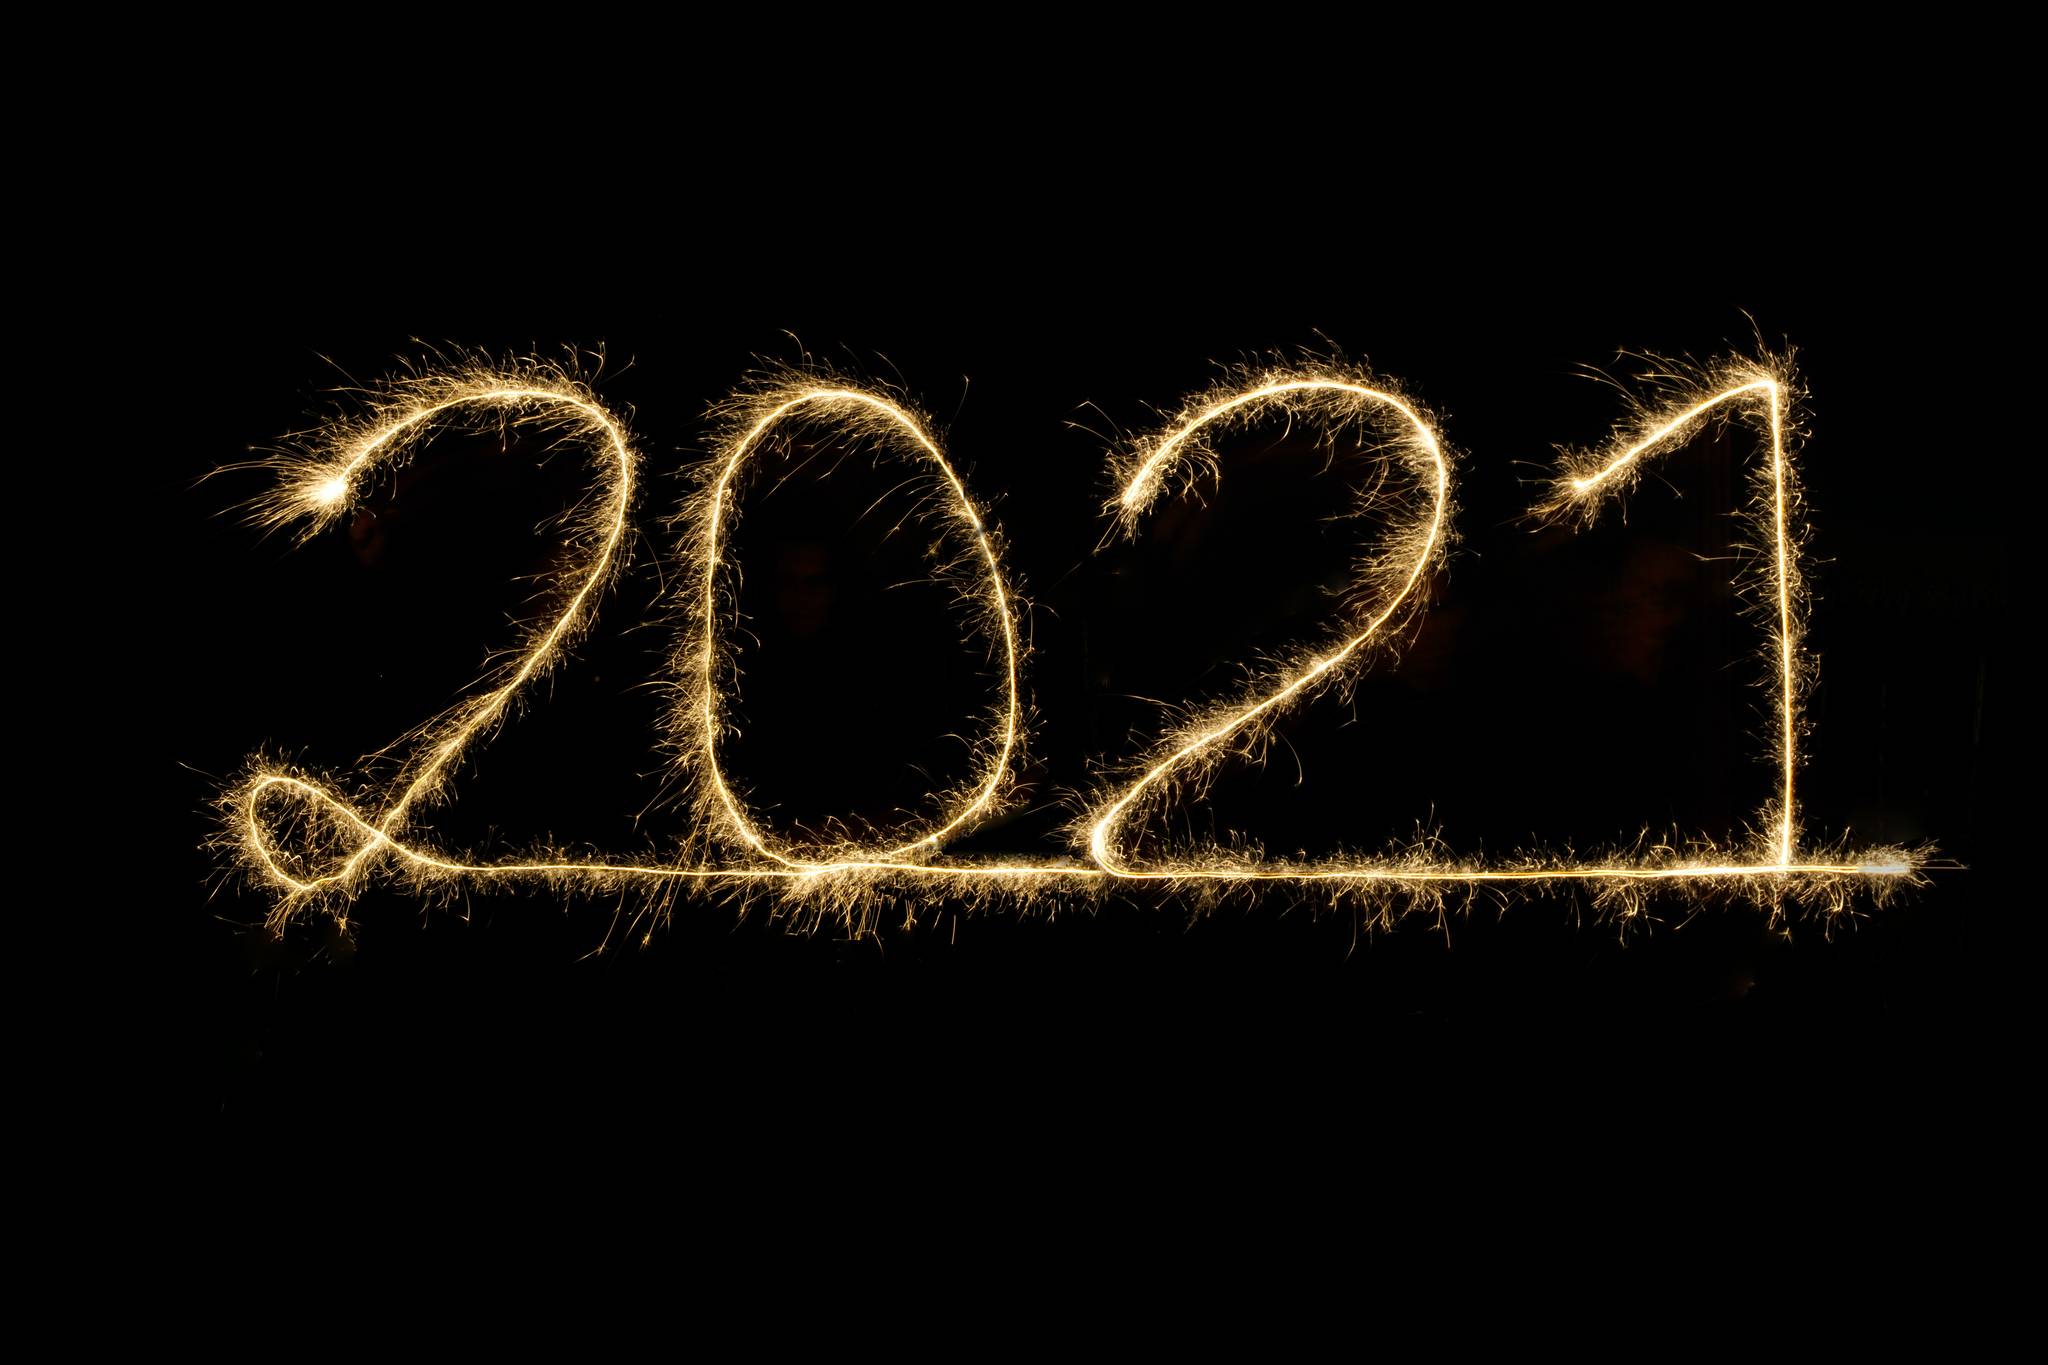 Goodbye, 2020. Good riddance, more likely. We had such high hopes for you—you were supposed to be this shiny new year to start off a new decade.